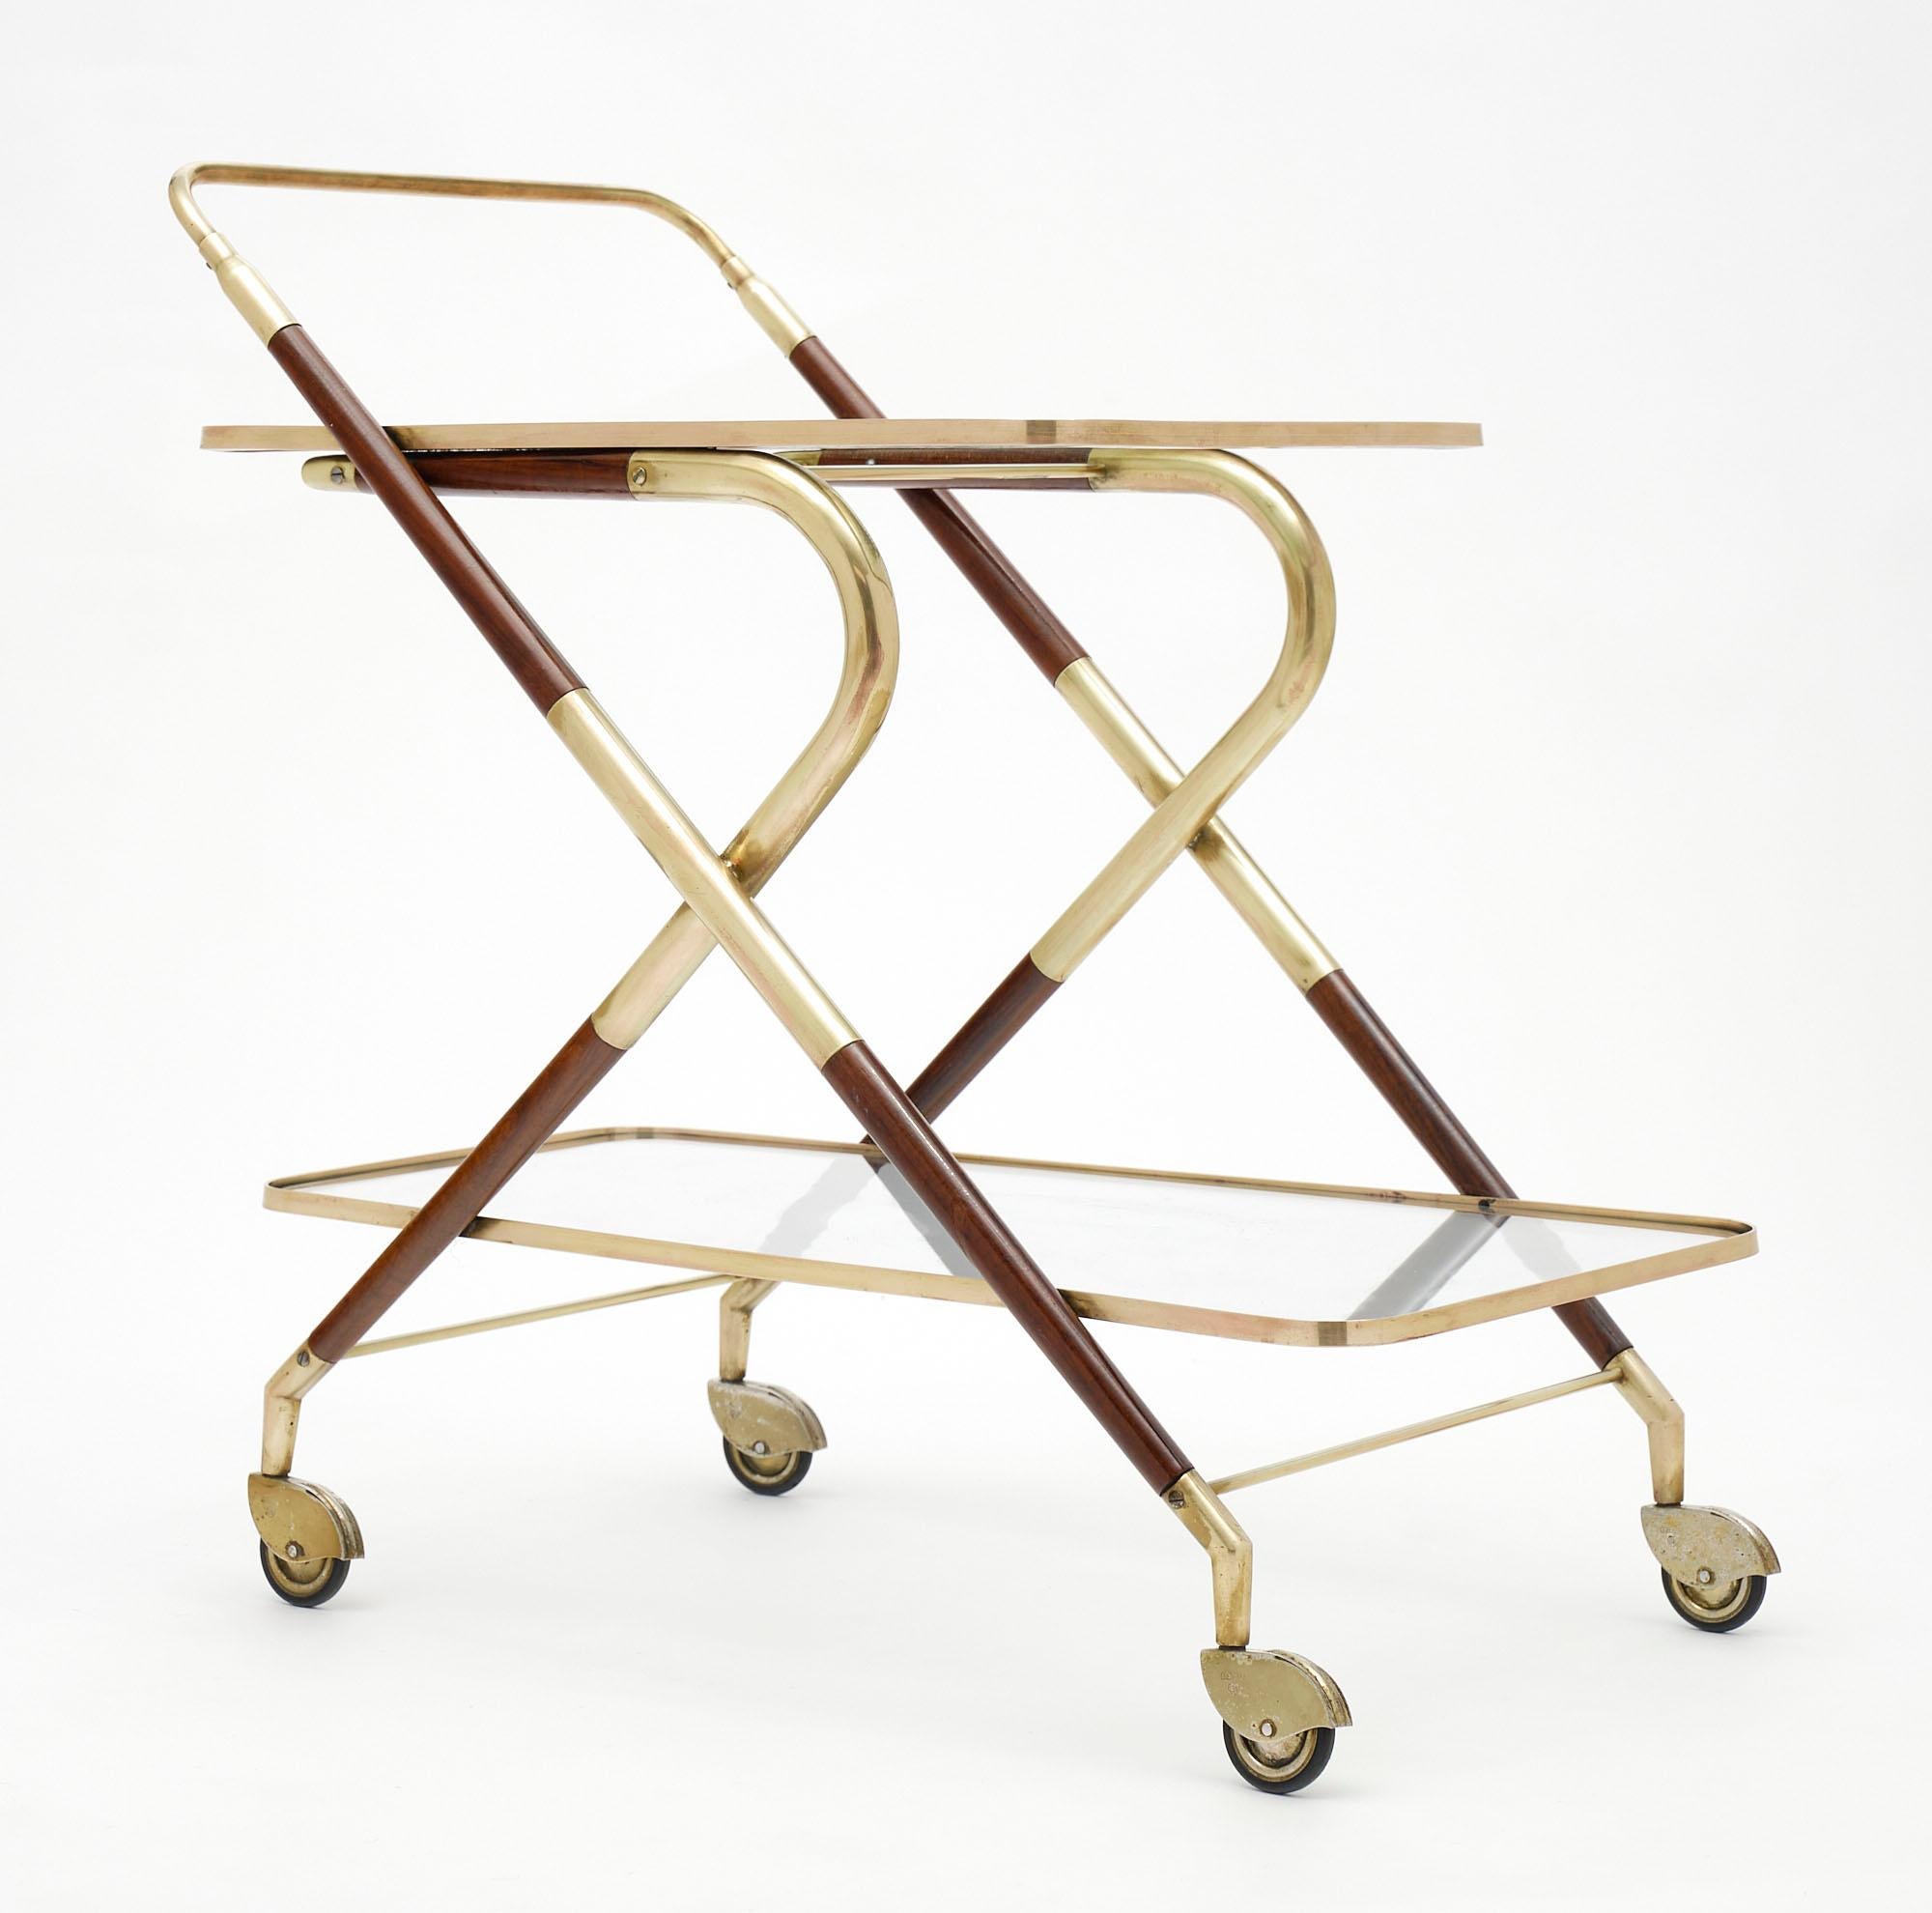 Bar cart from Itlay made of mahogany and brass by designer Cesare Lacca. There are two glass shelves as well; and it is supported by original casters.